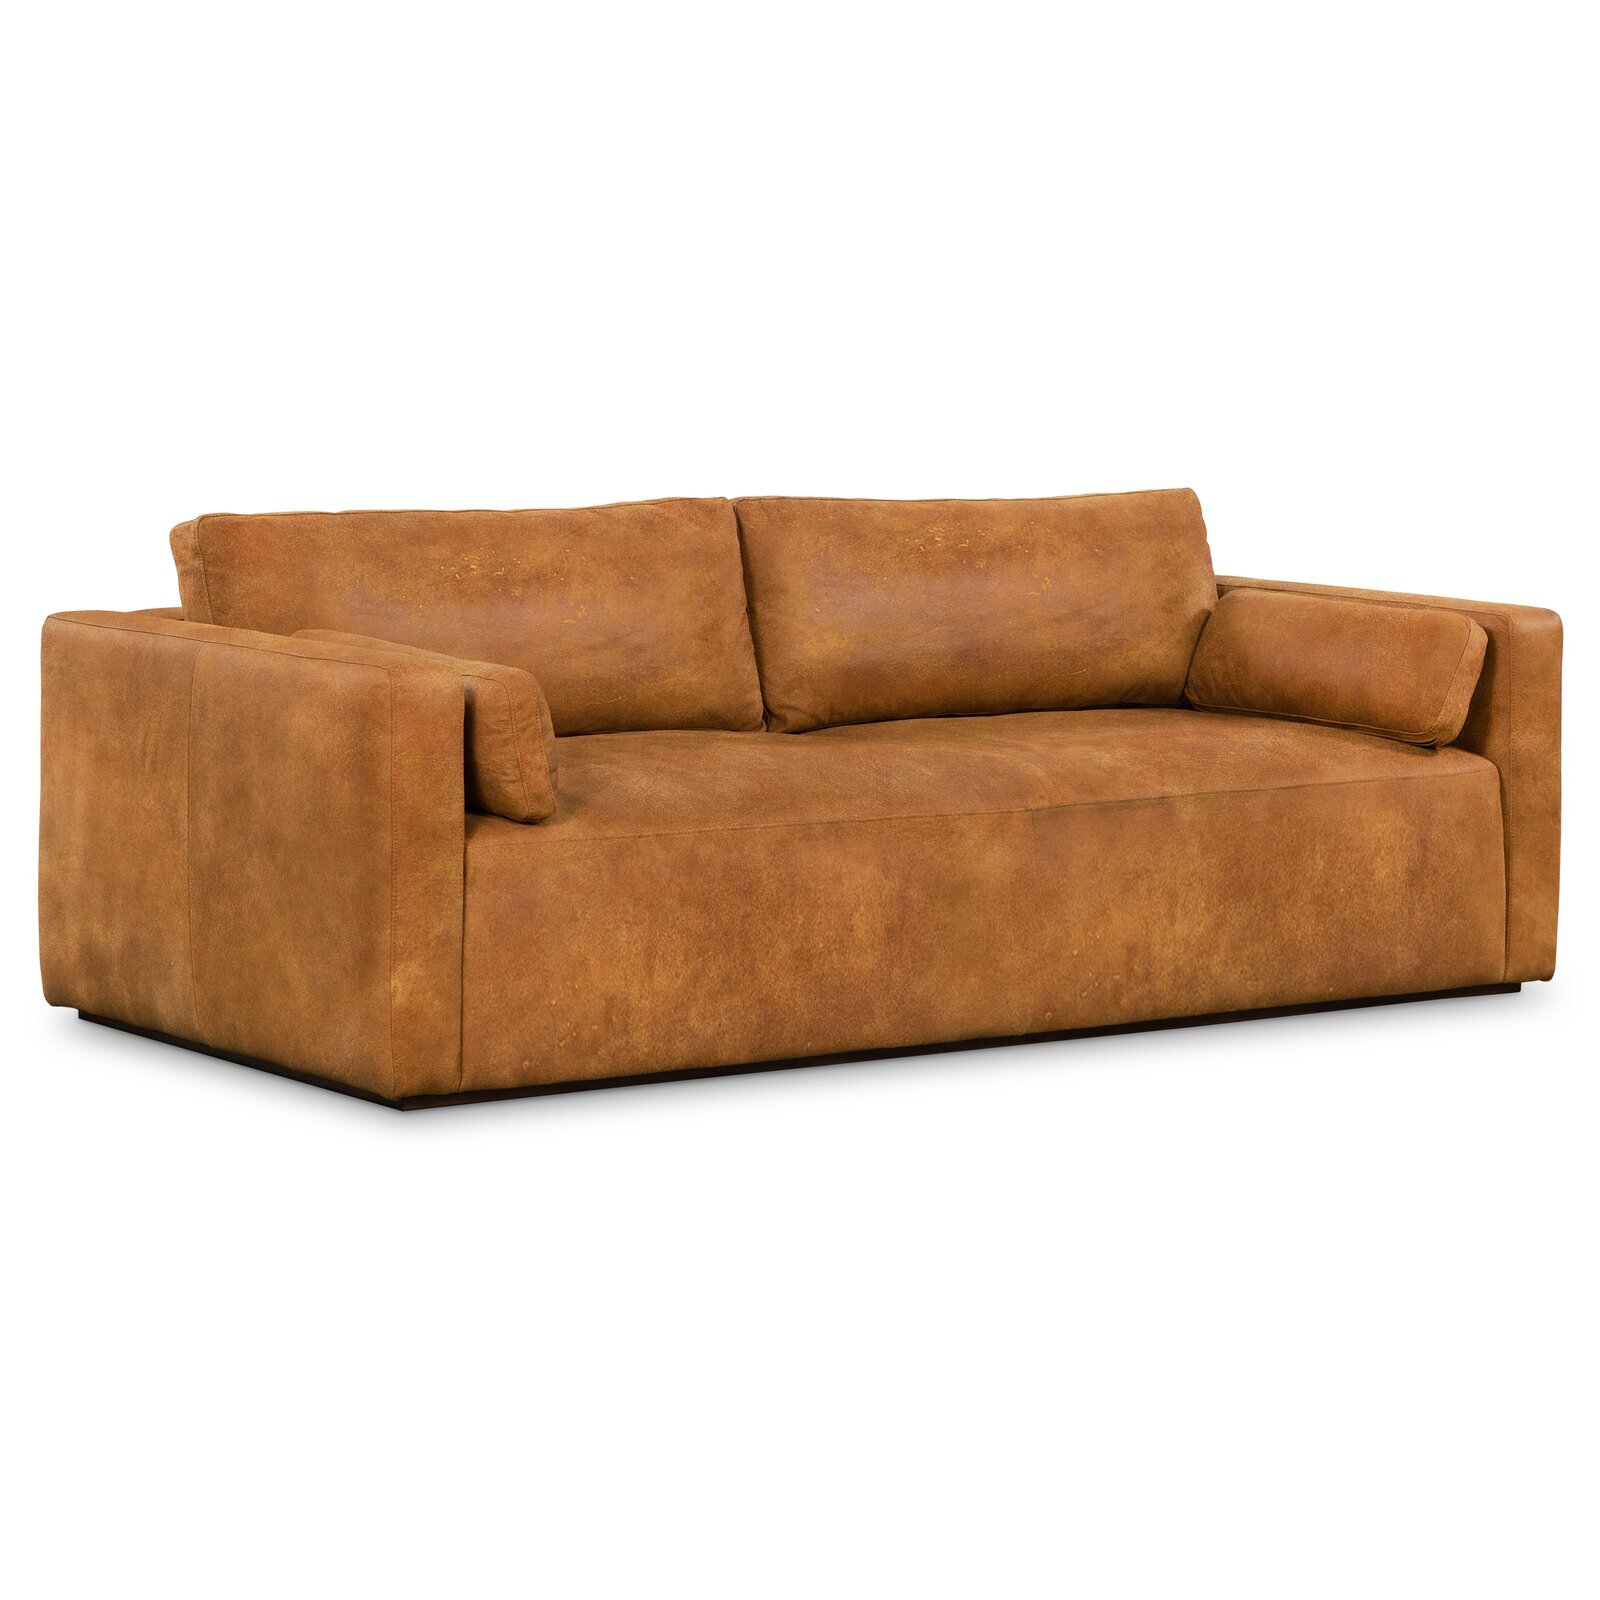 Stylish Brown Leather Couch